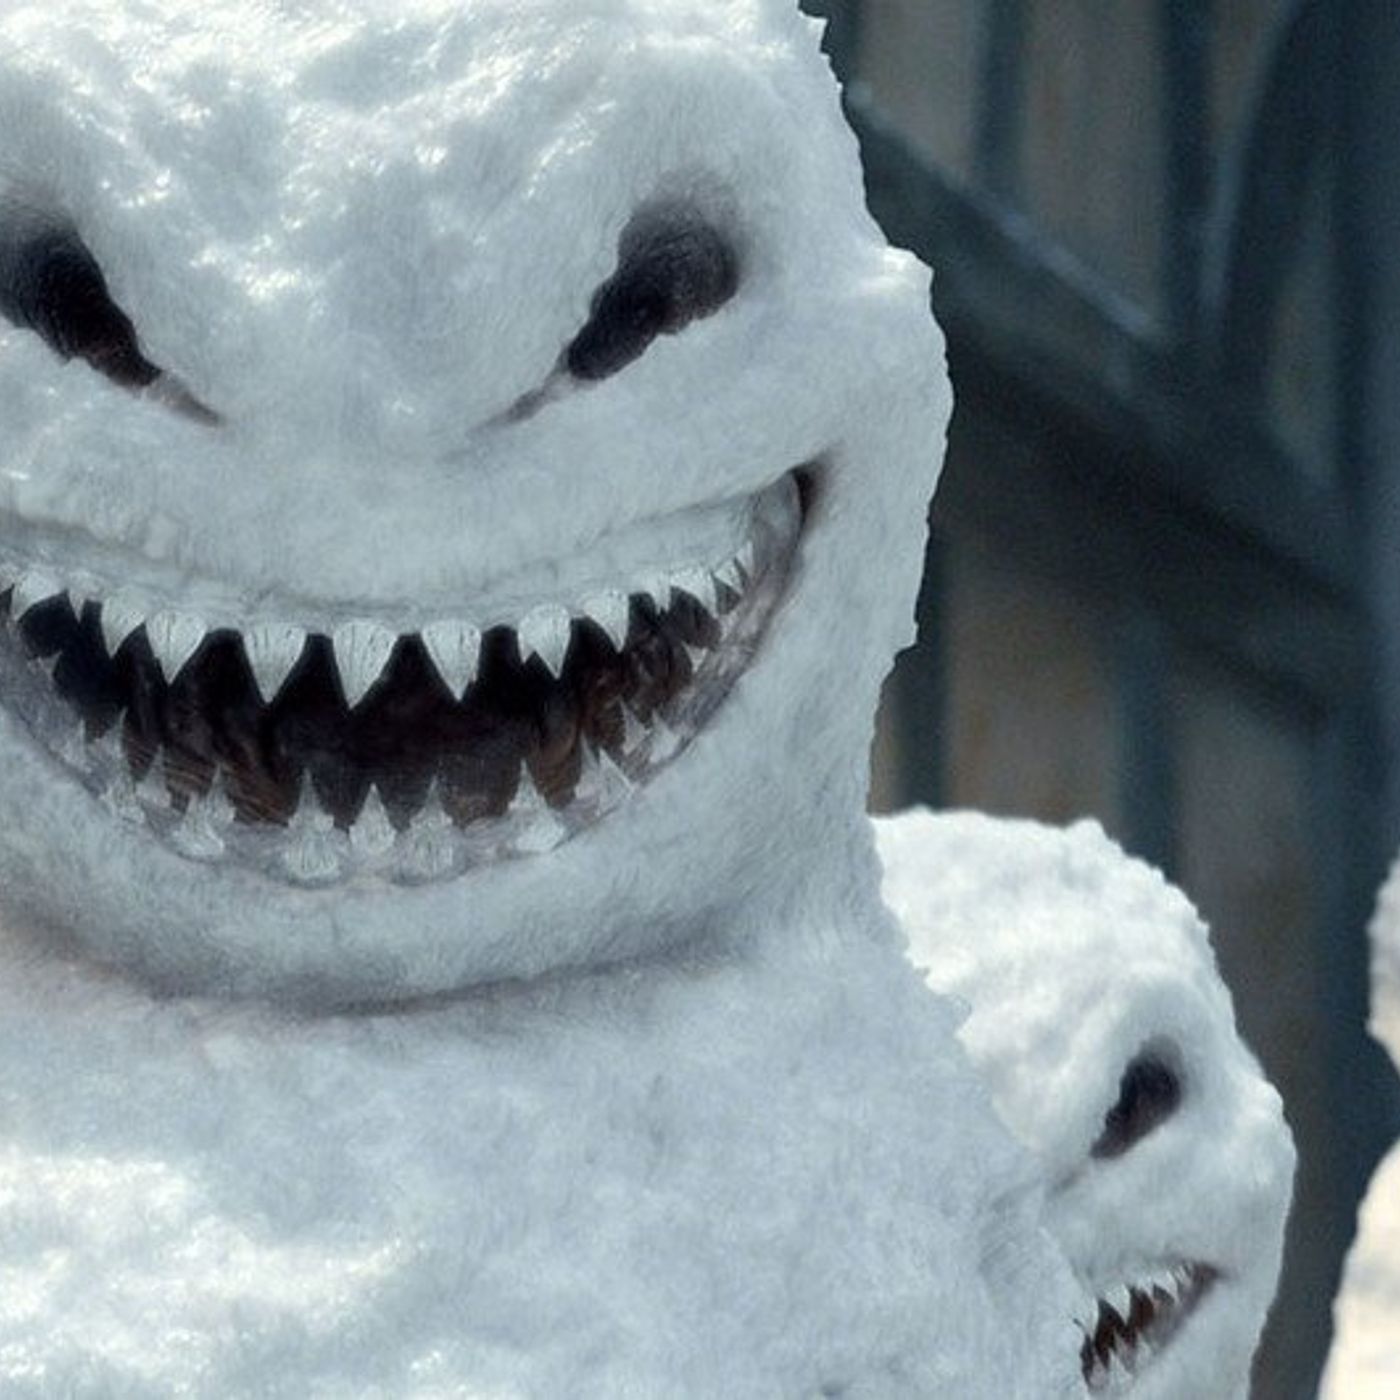 S3 Ep1: Doctor Who: The Snowmen Review (Welcome to 2013!)